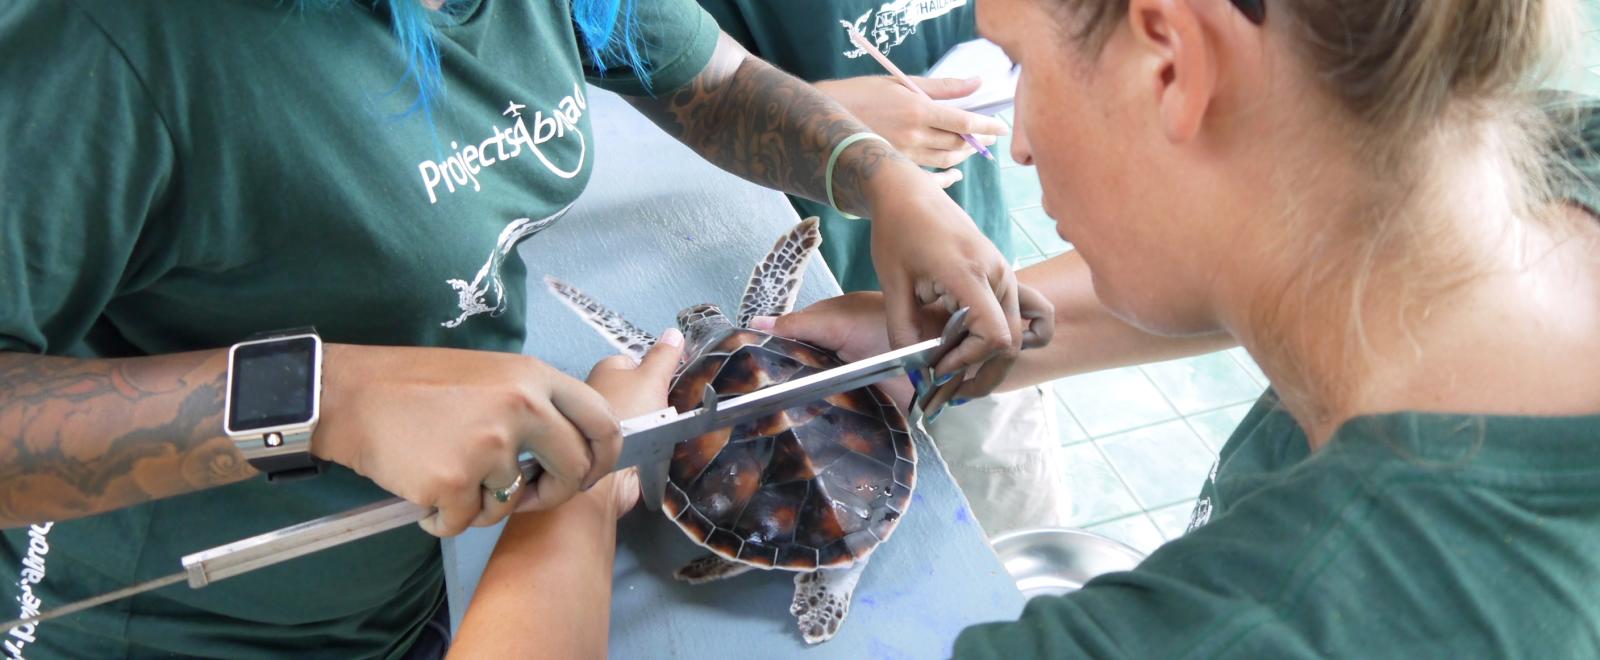 Conservation volunteers measure the size of a sea turtle during their marine project in Thailand